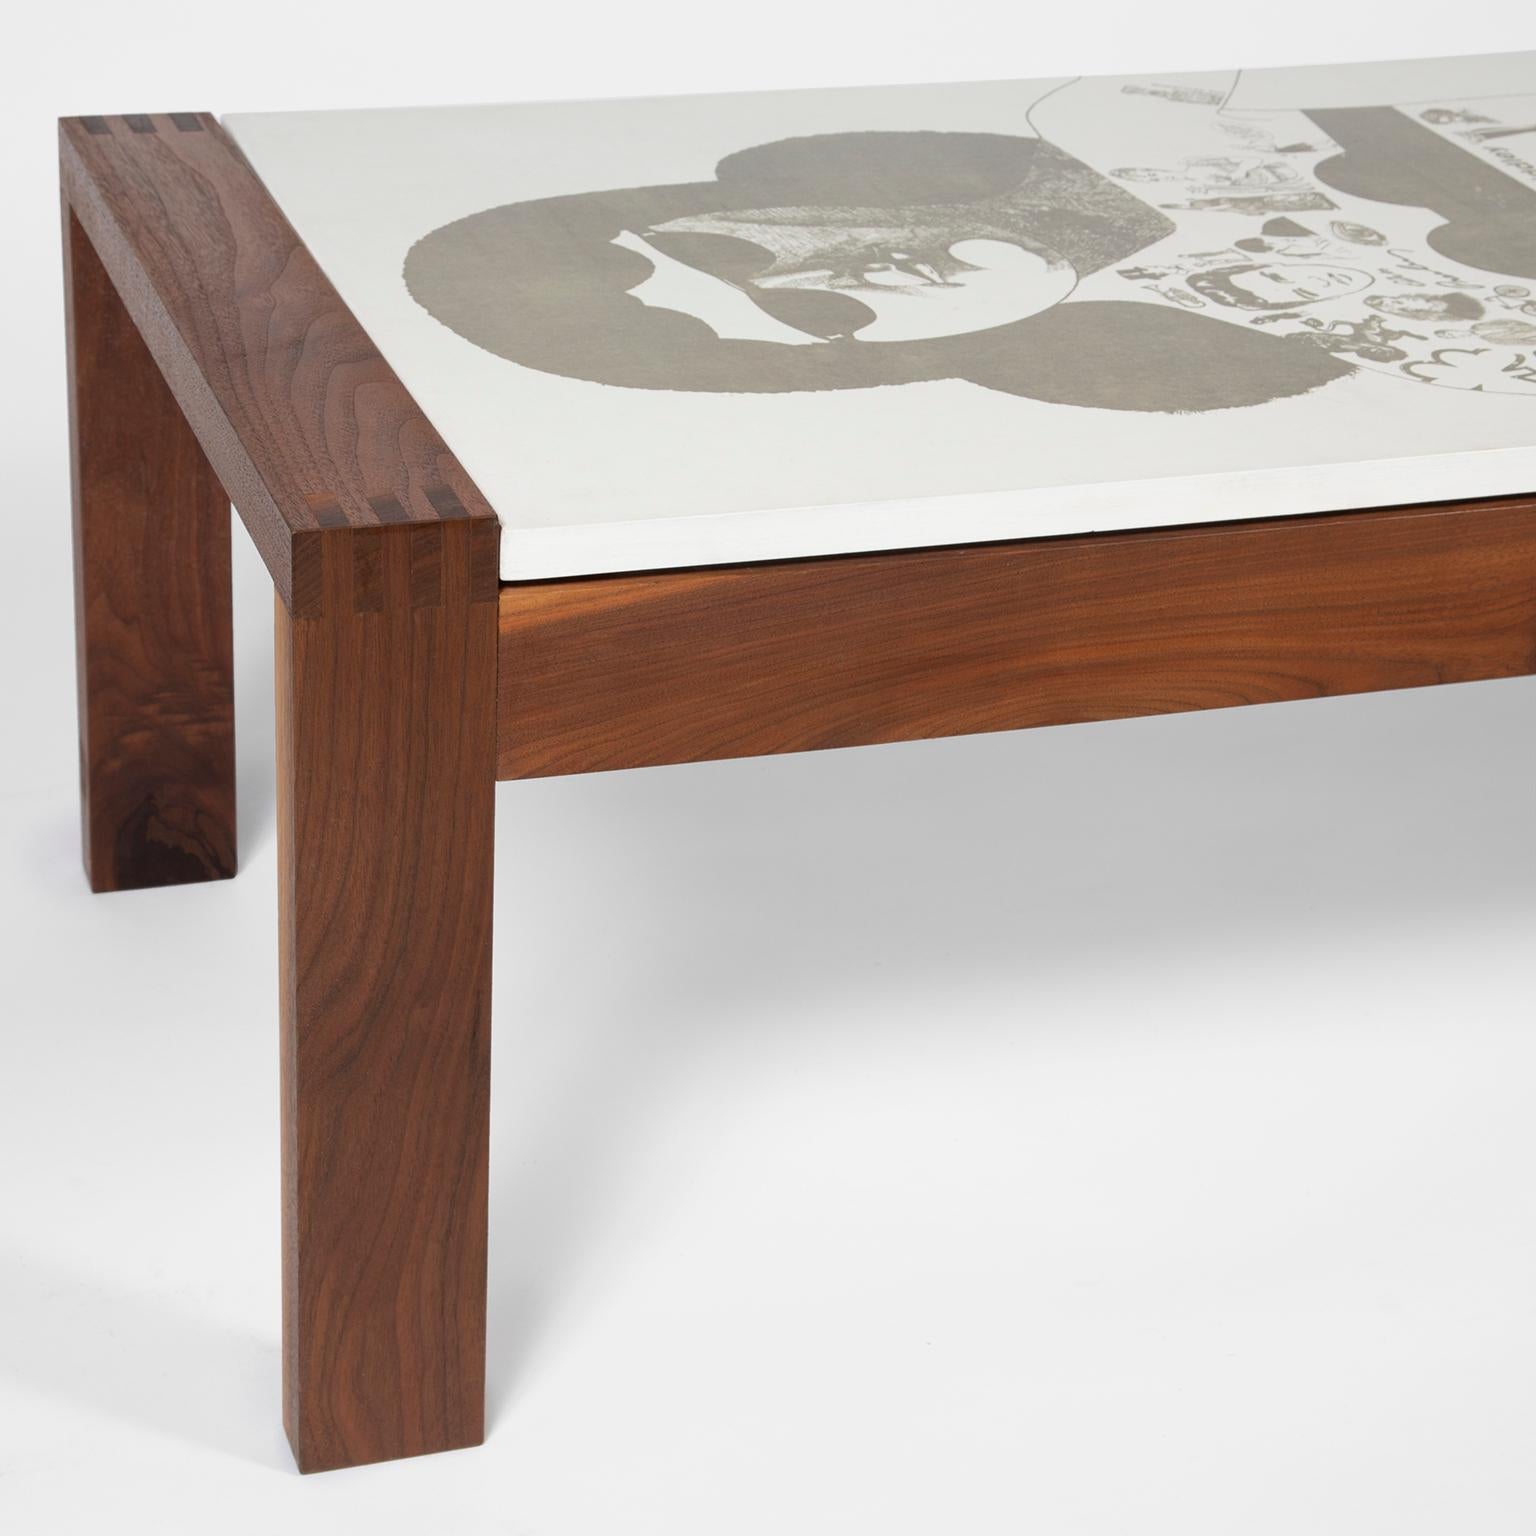 Tattoo Lady Table by DANAD Design 'Peter Blake' For Sale 1